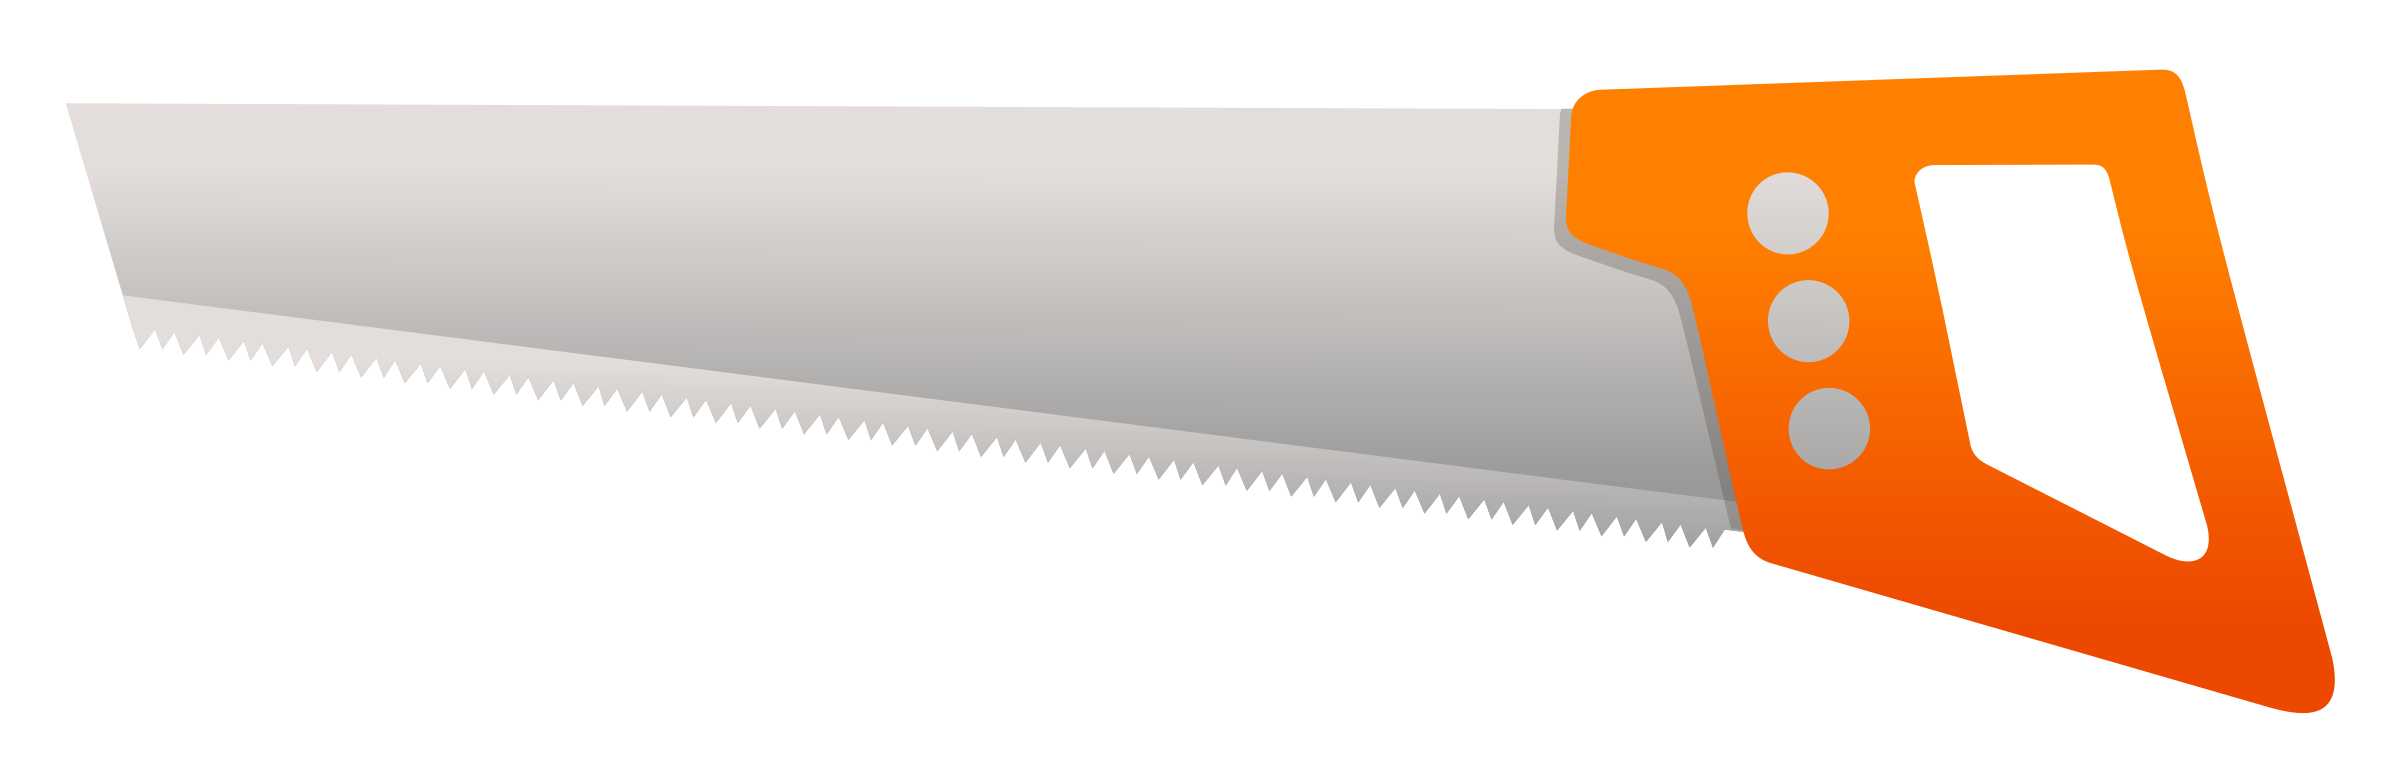 tool clipart saw